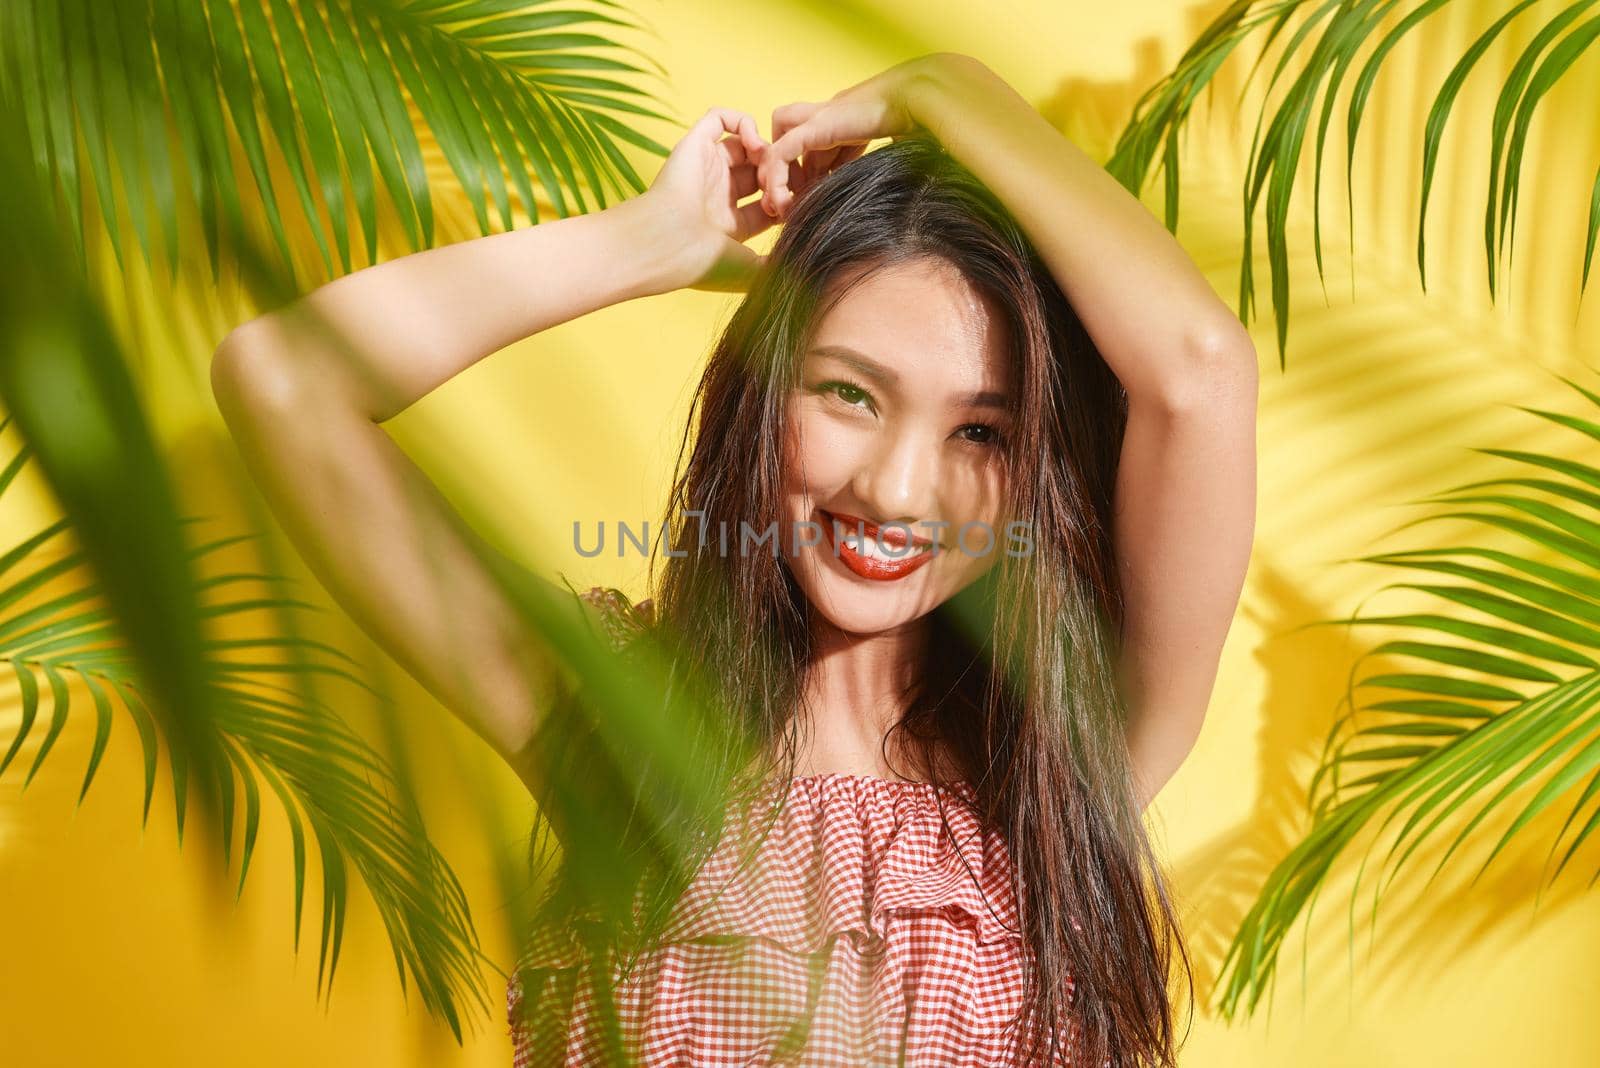 A beautiful girl with wet hair stands among palm leaves in yellow background